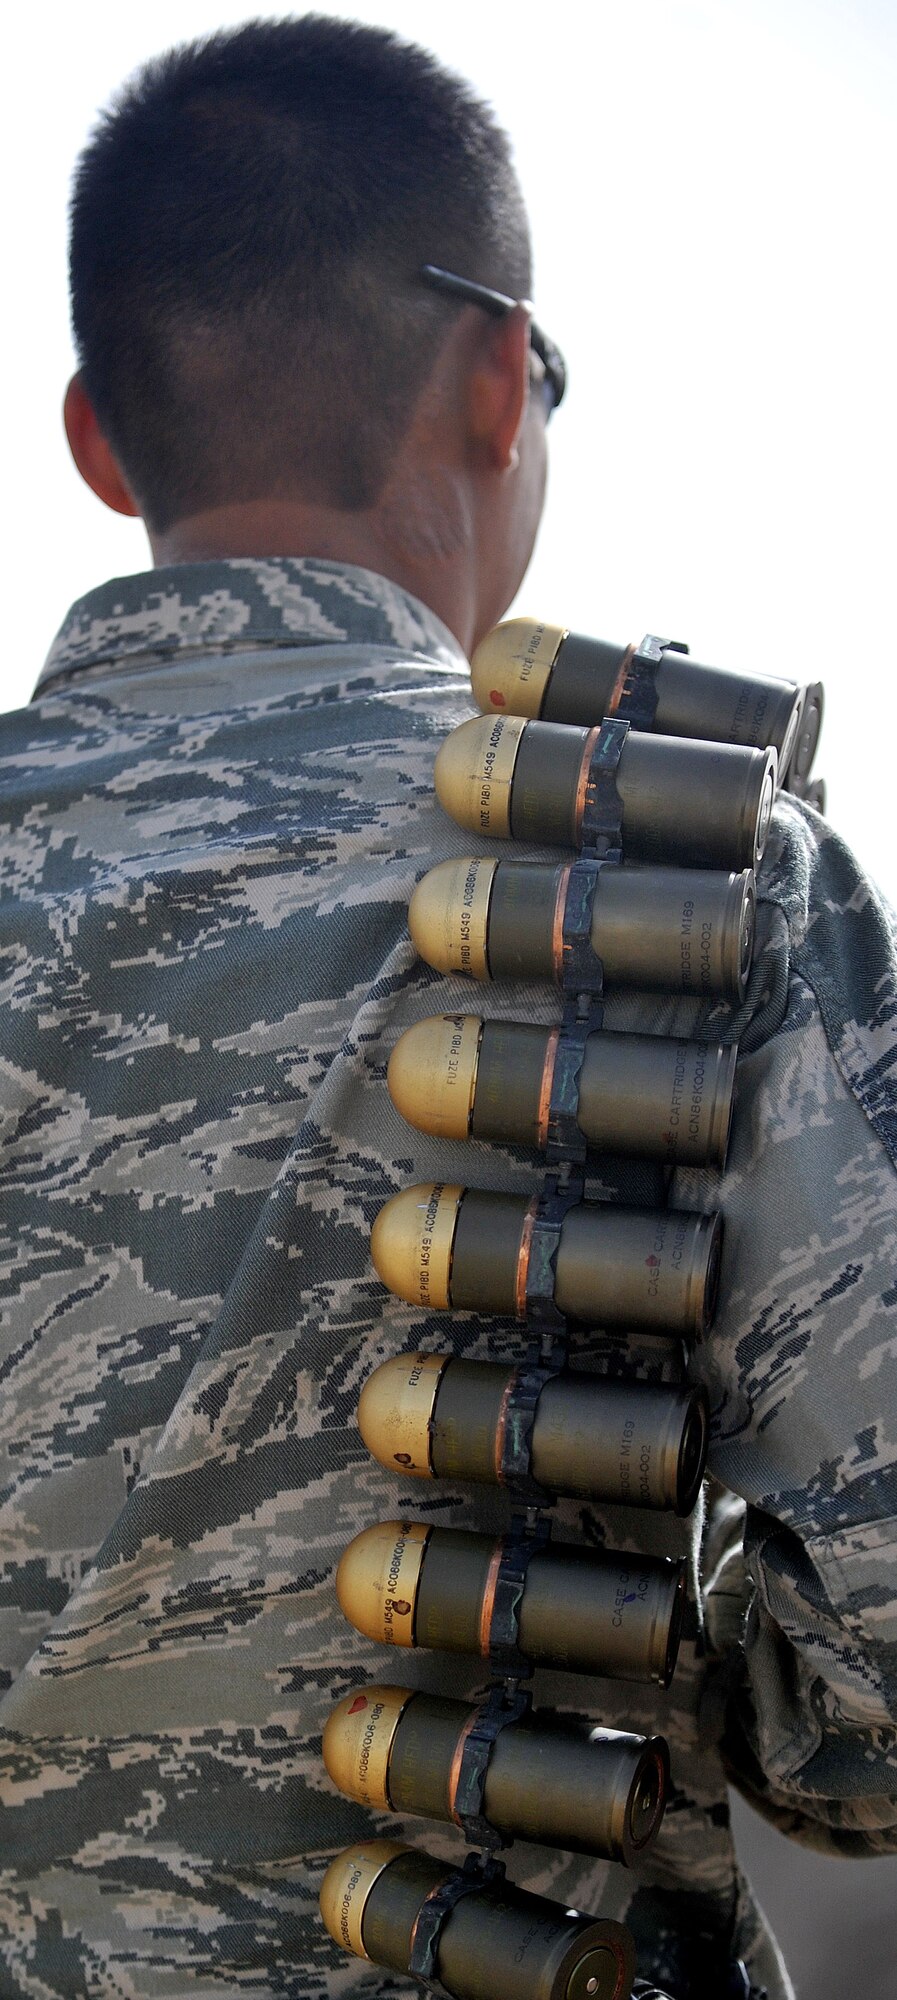 Senior Airman Jesse Mercado, 407th Expeditionary Operations Support Squadron explosive ordnance disposal technician, carries a link of 40 millimeter rounds on his shoulder to add to the pile of ammunition for detonation March 3, 2010, at Ali Air Base, Iraq. (U.S. Air Force photo by Senior Airman Andrew Lee/Released) 